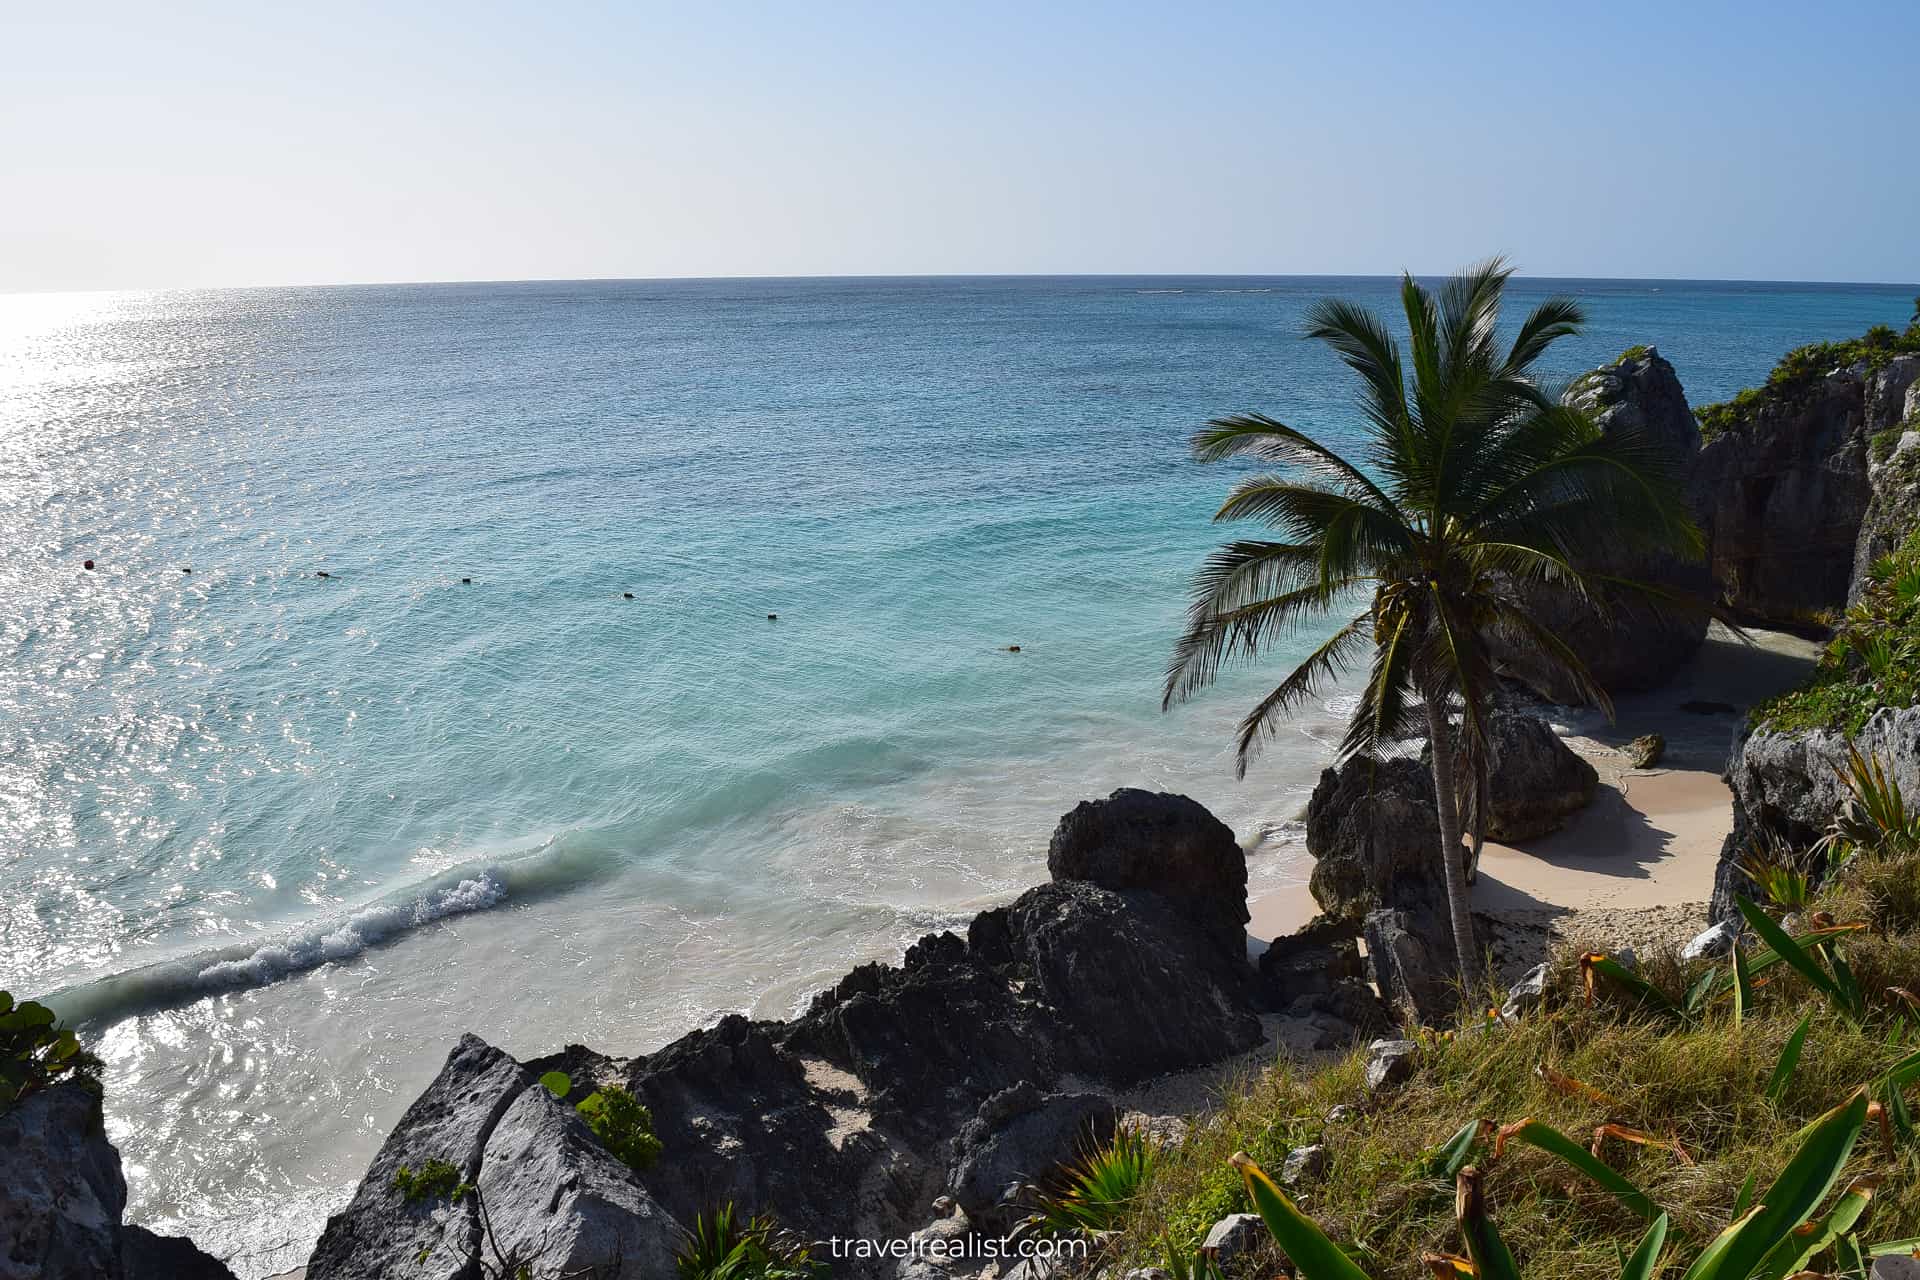 Beach and palm tree in Tulum, Mexico